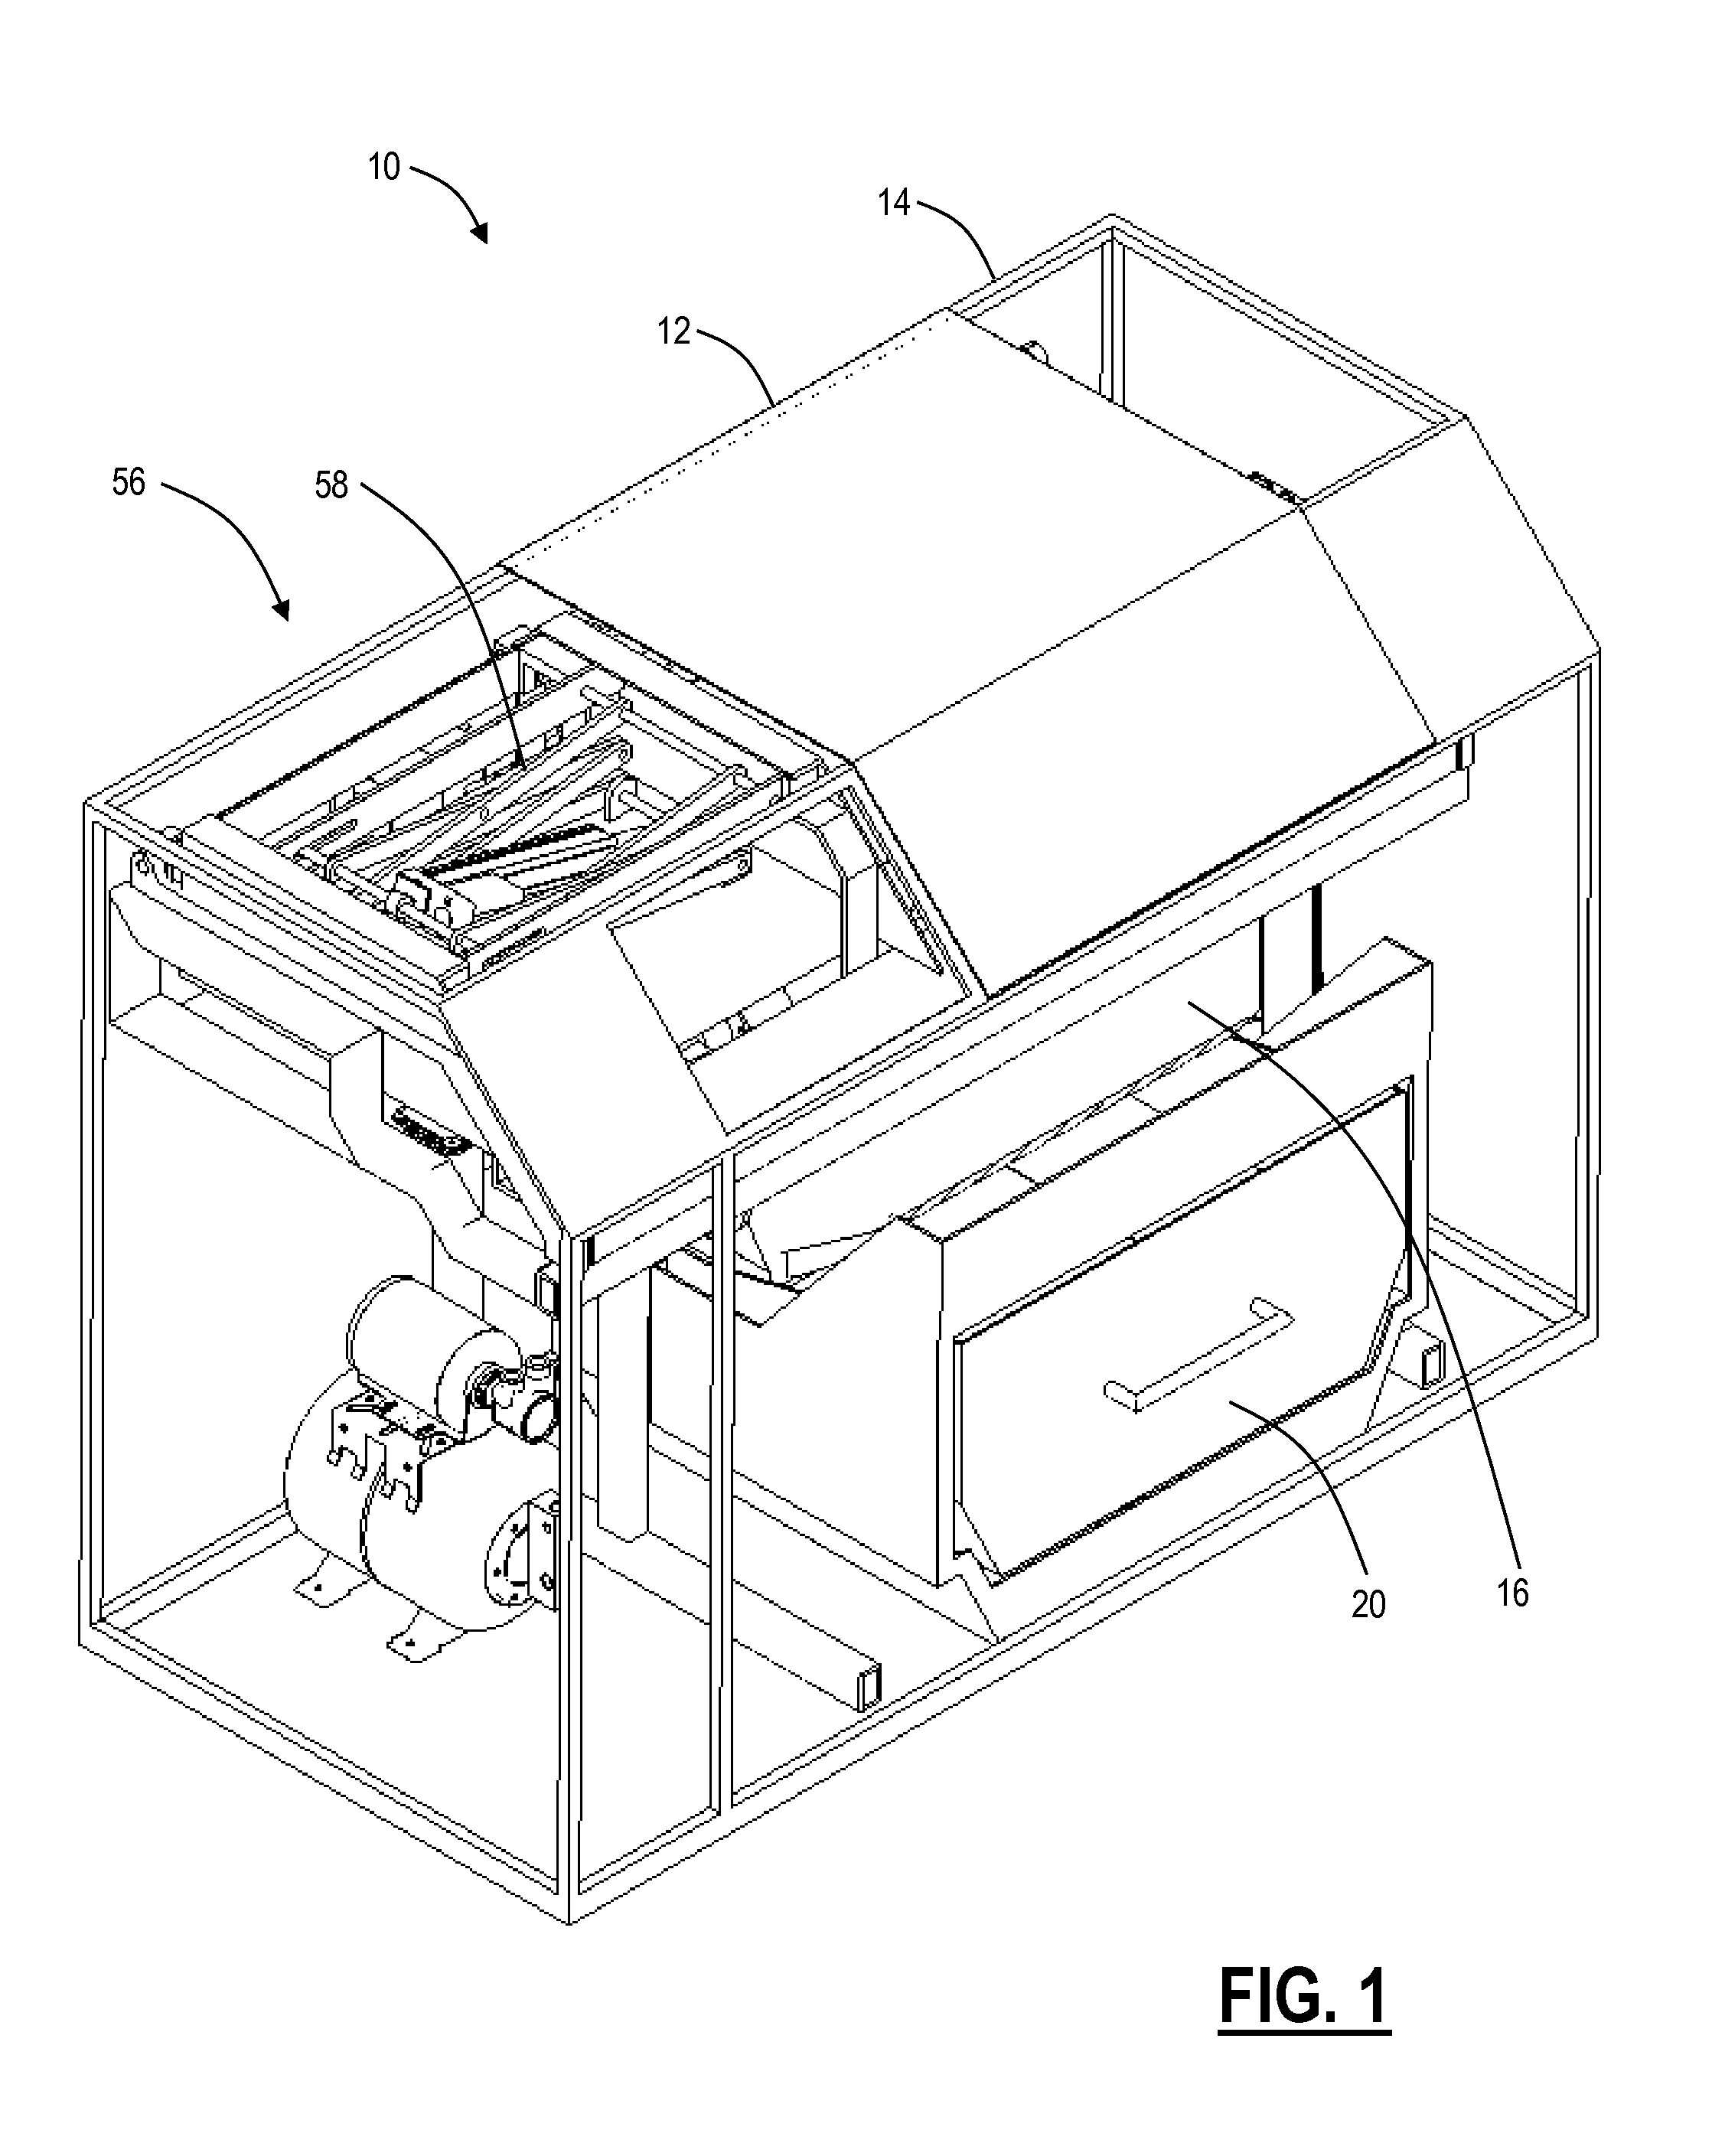 Biomedical and pharmaceutical waste sterilizing systems and methods